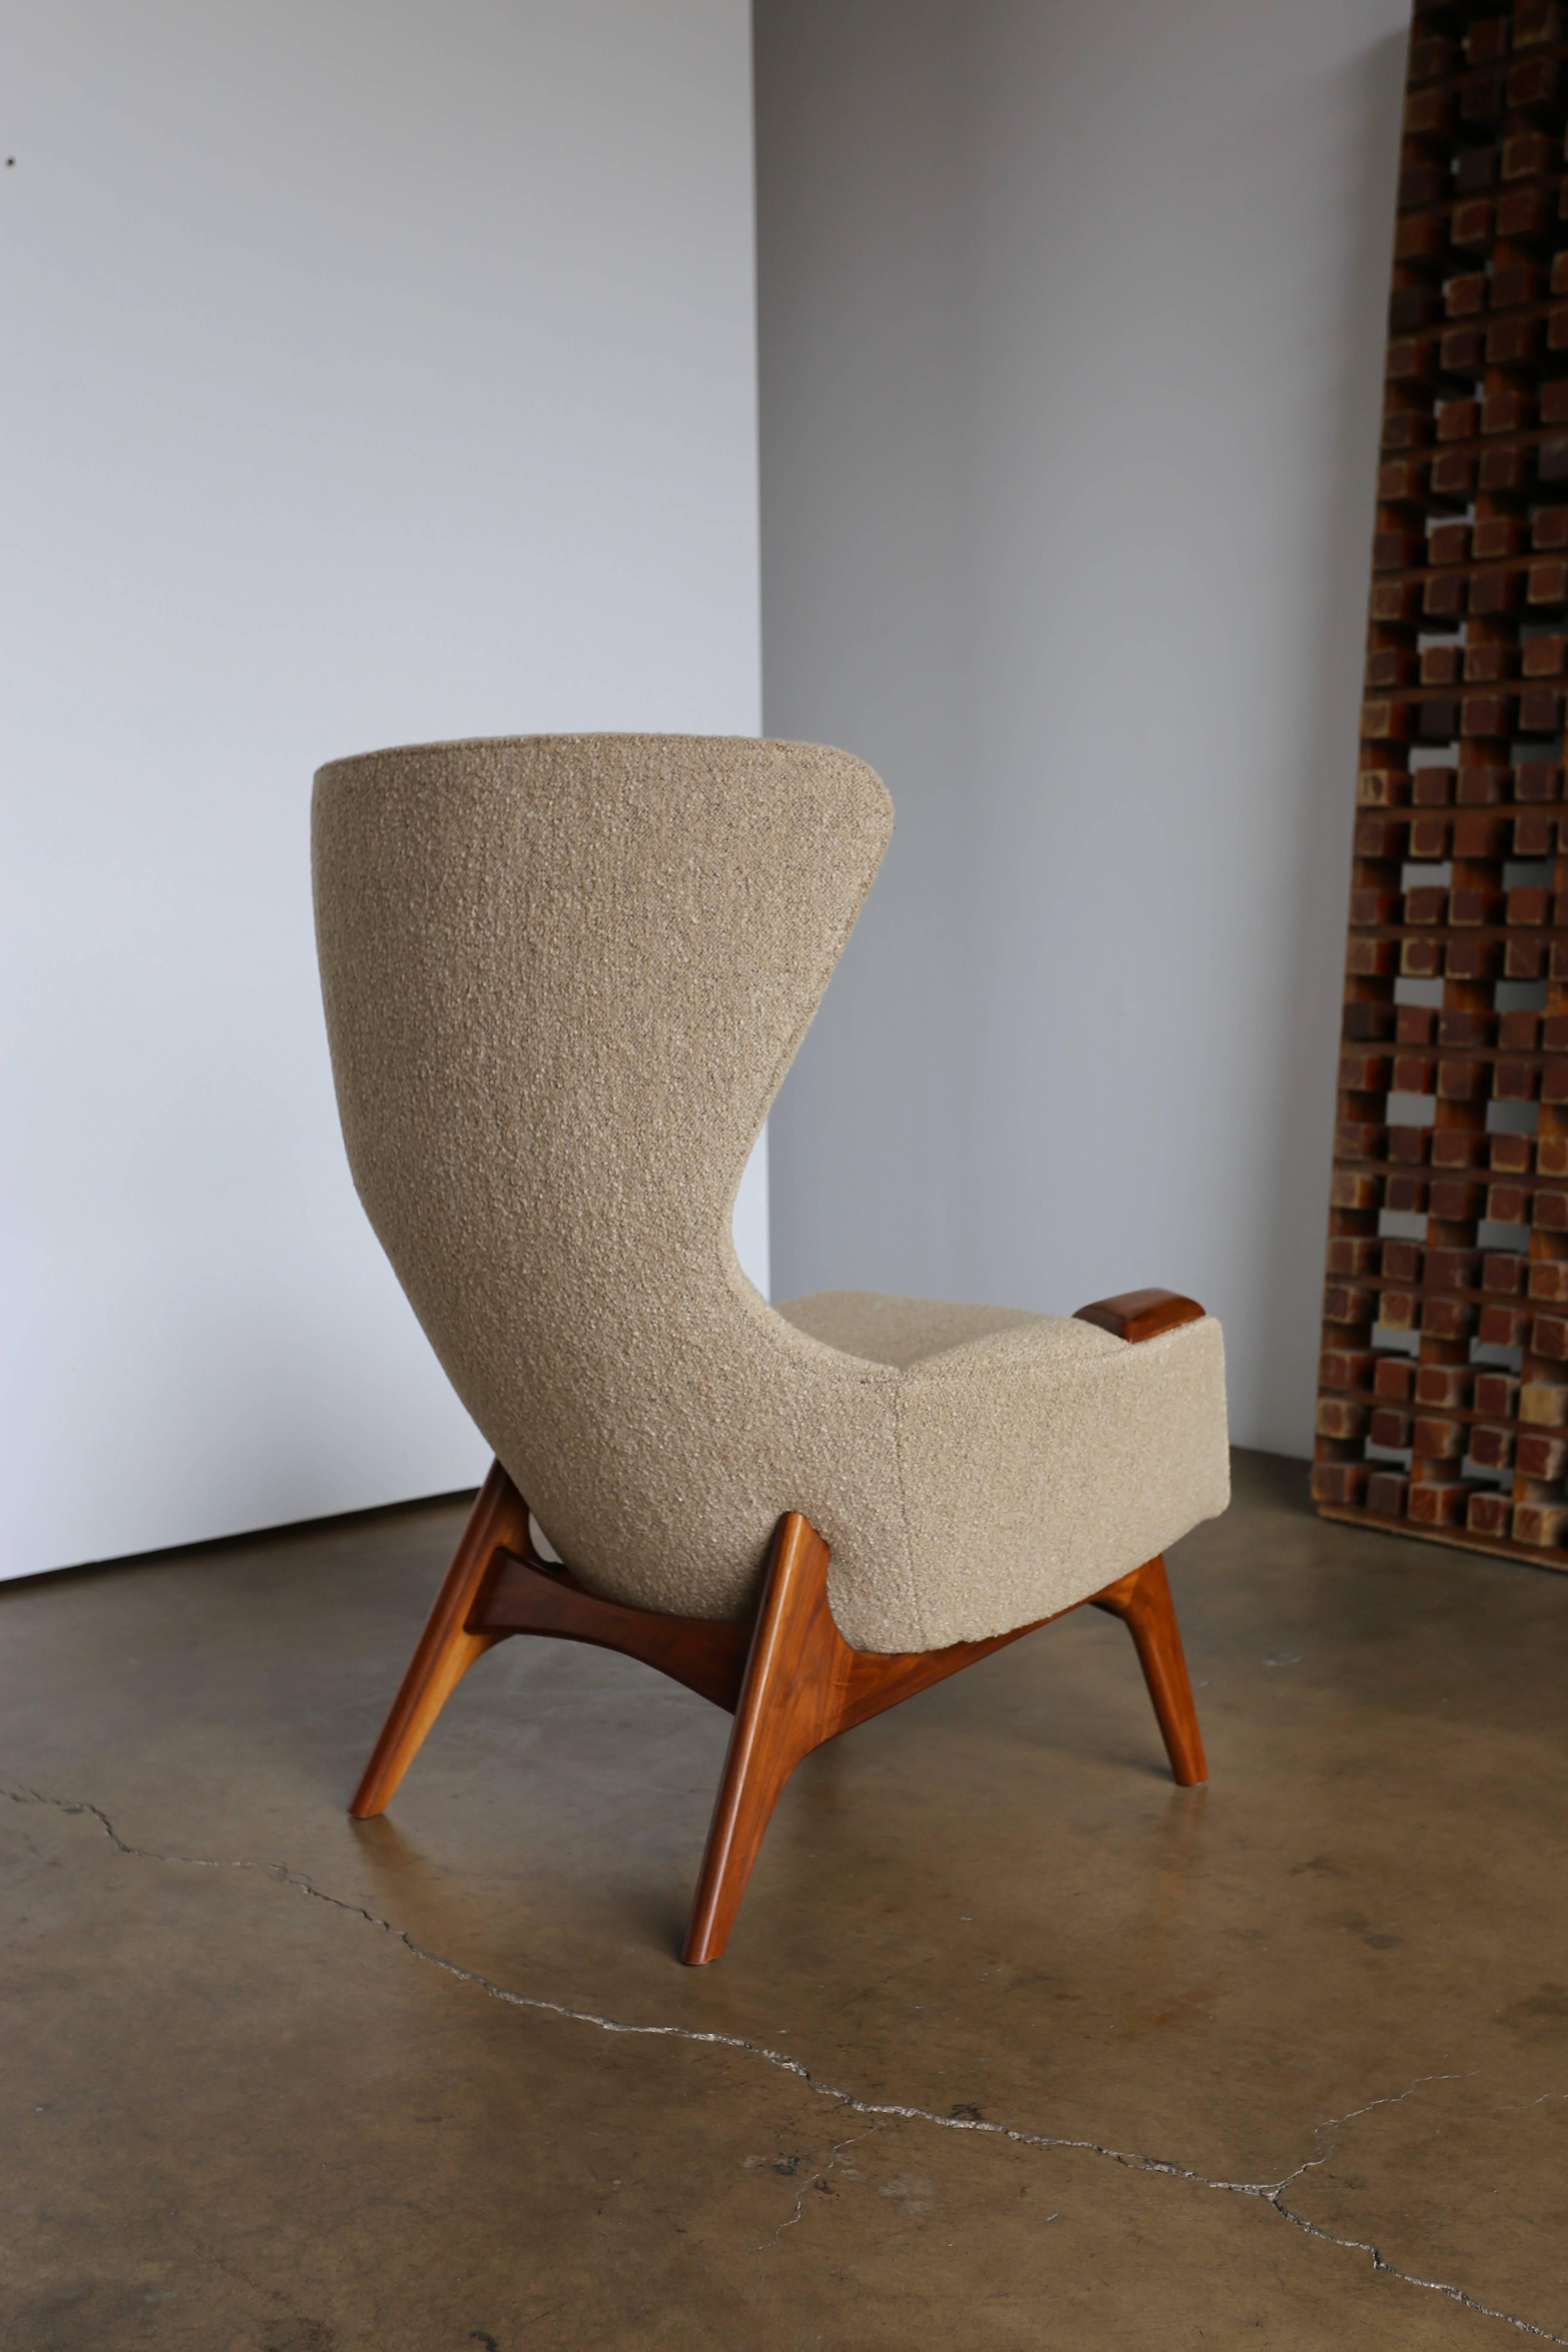 Sculptural wingback chair by Adrian Pearsall for Craft Associates.